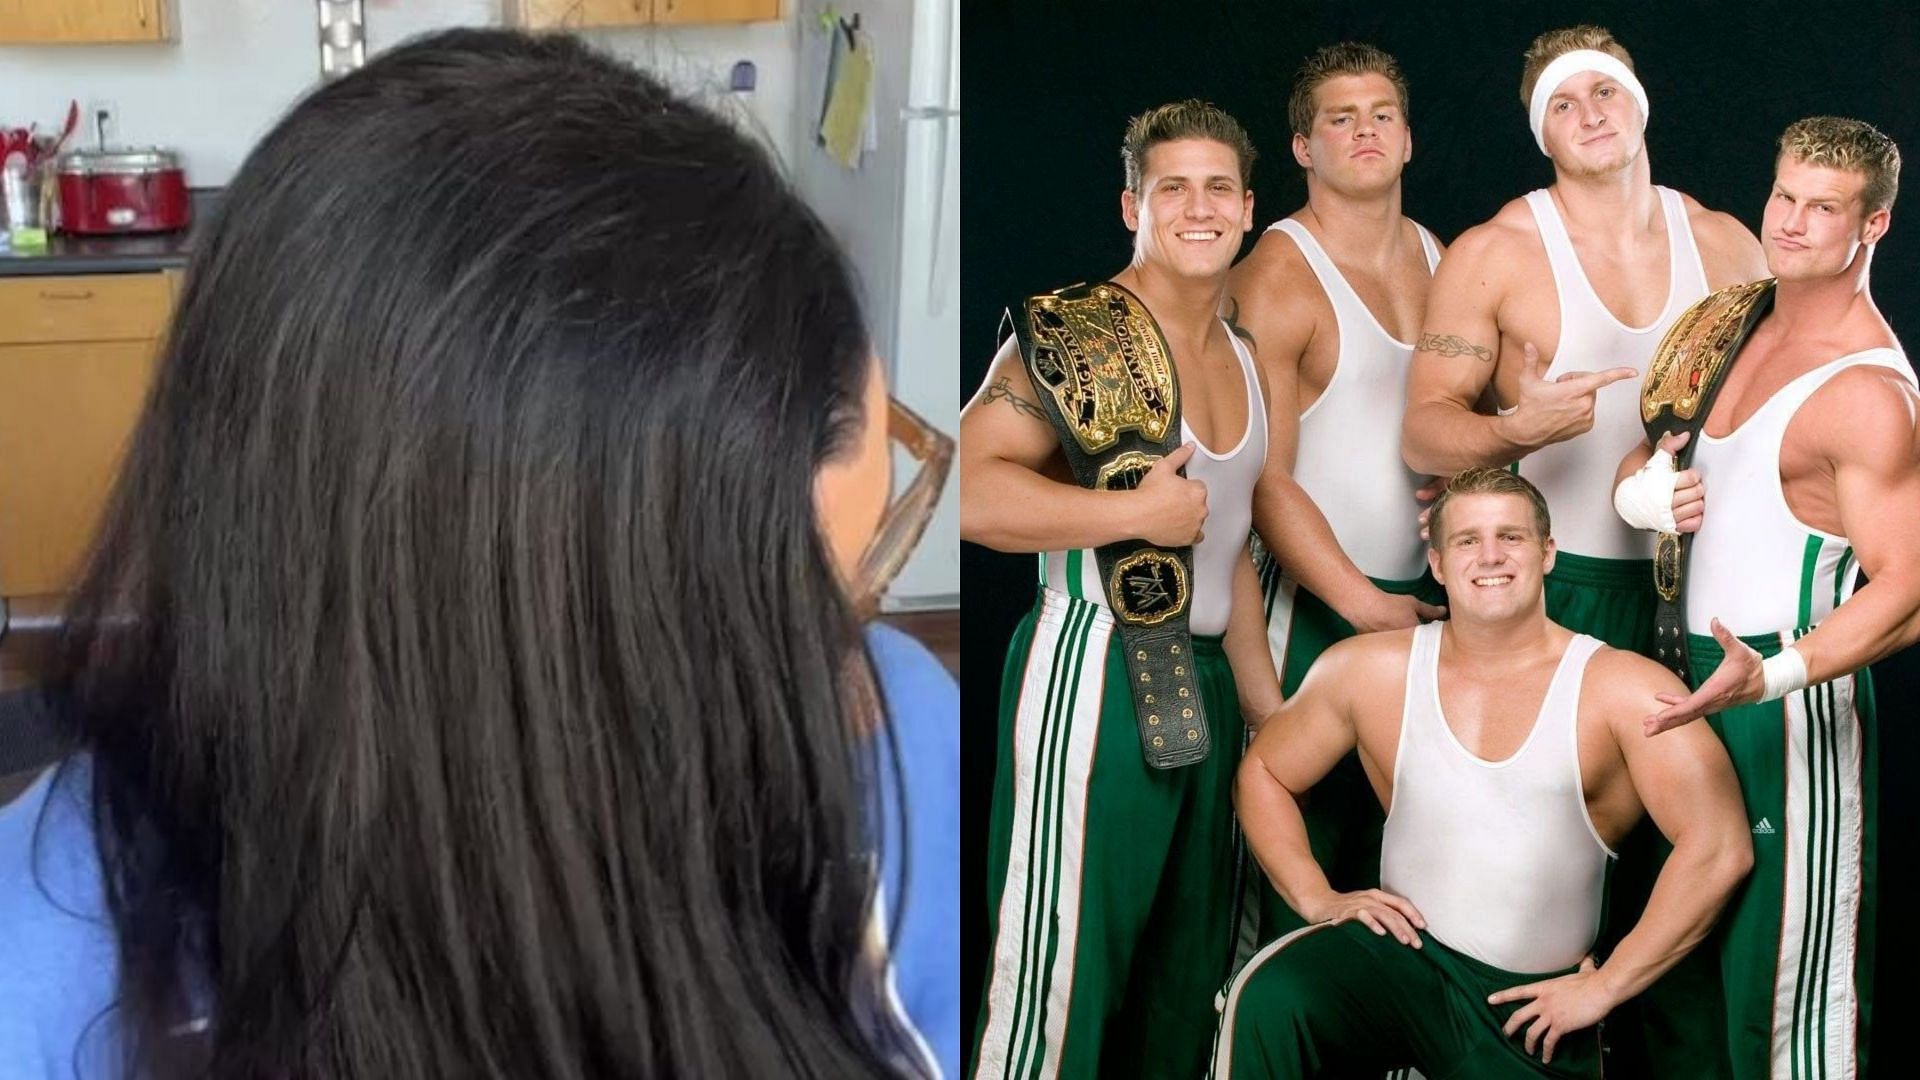 Mikey of The Spirit Squad had a crush on a 2-time WWE Women